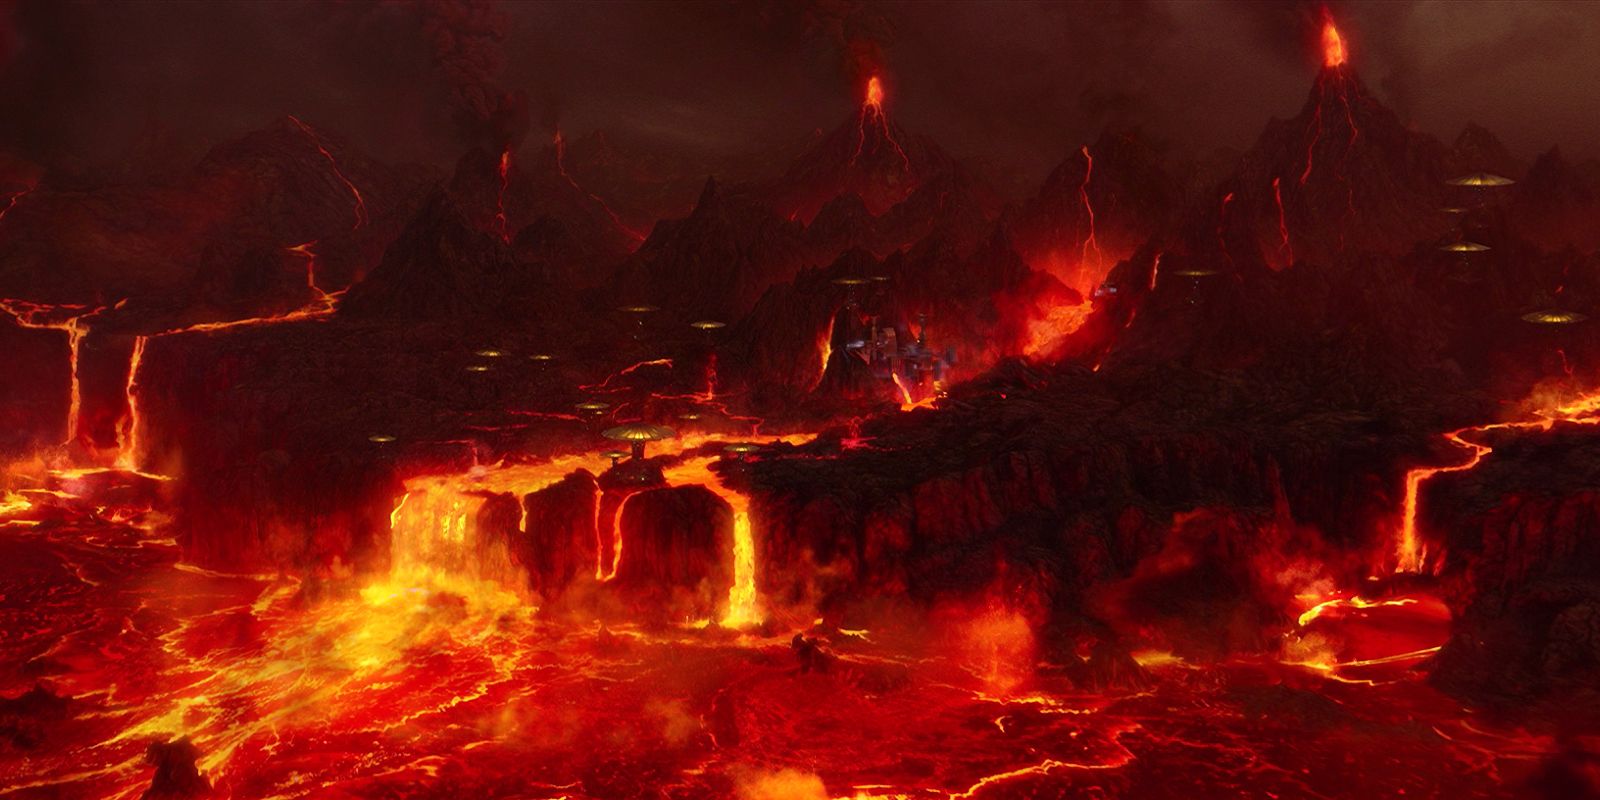 Mustafar was supposedly the next map coming to Battlefront 2